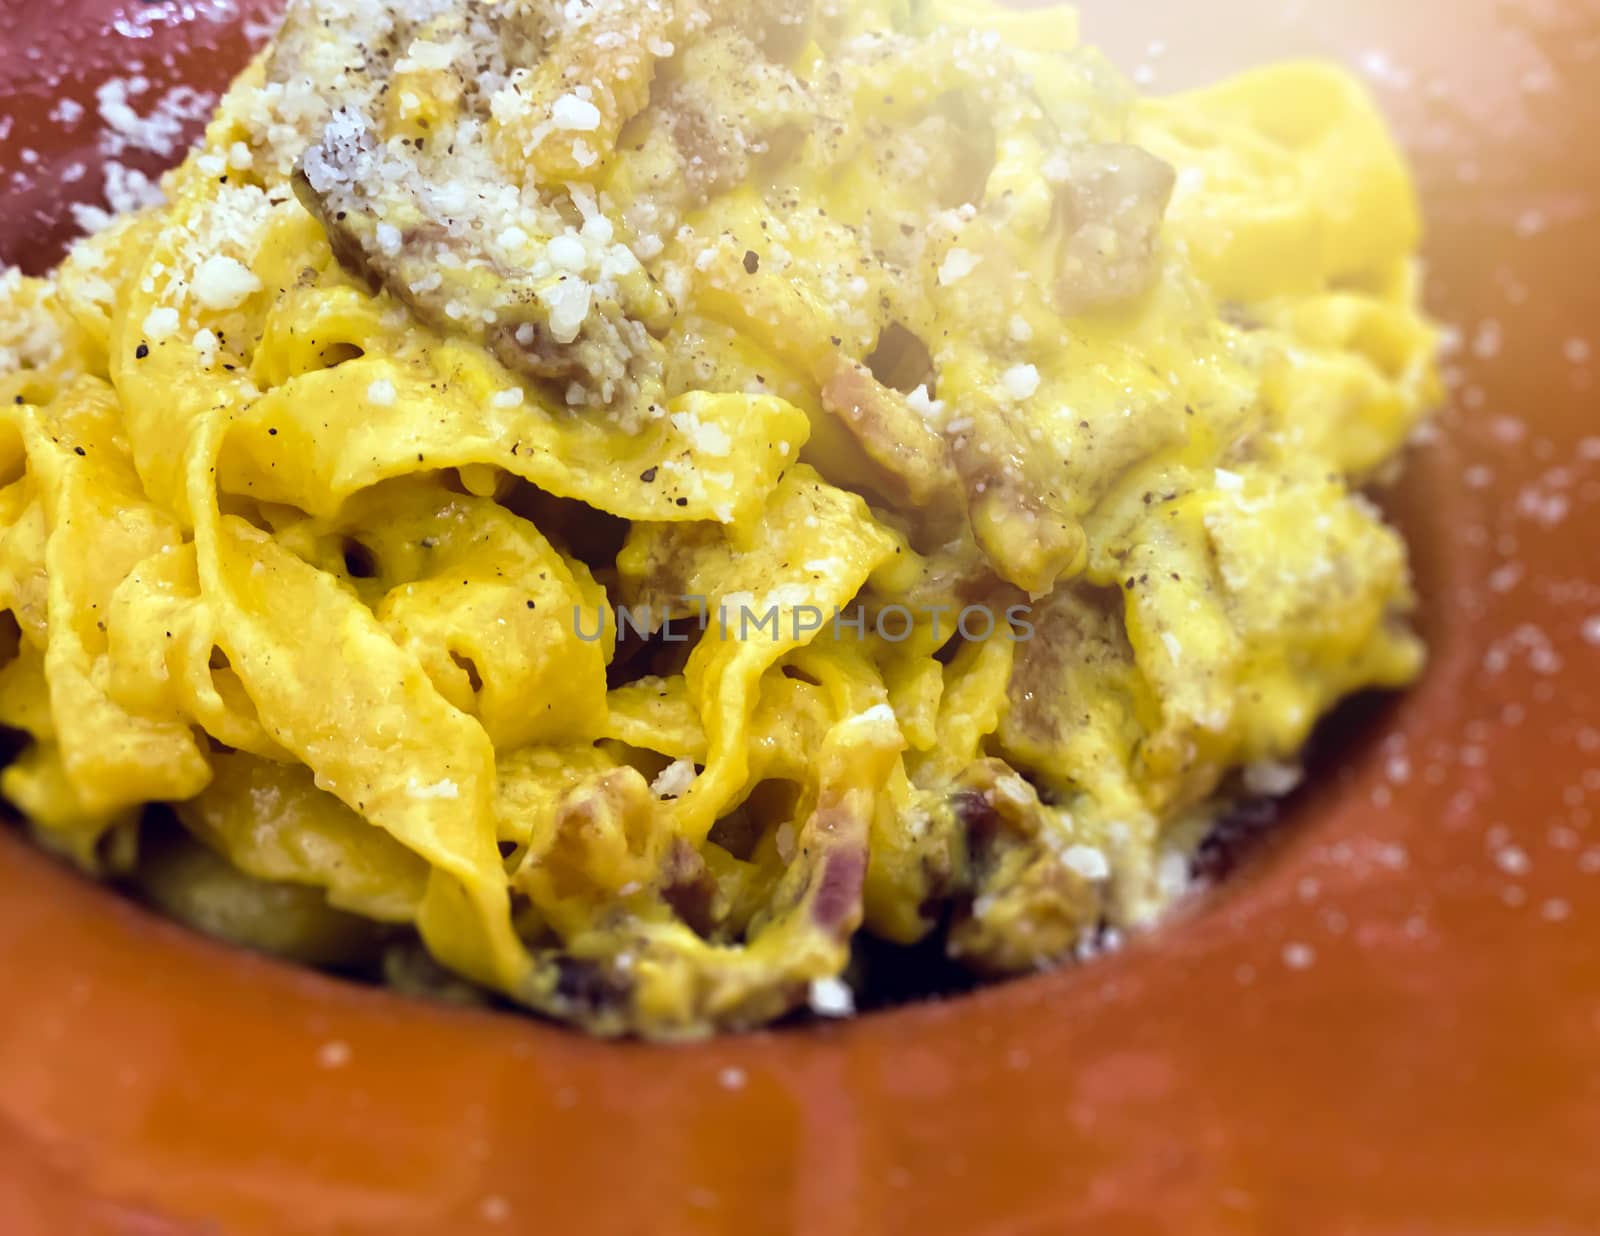 close-up view of a portion of pasta with carbonara sauce cooked with eggs, bacon and topped with pecorino cheese and parmesan. by rarrarorro